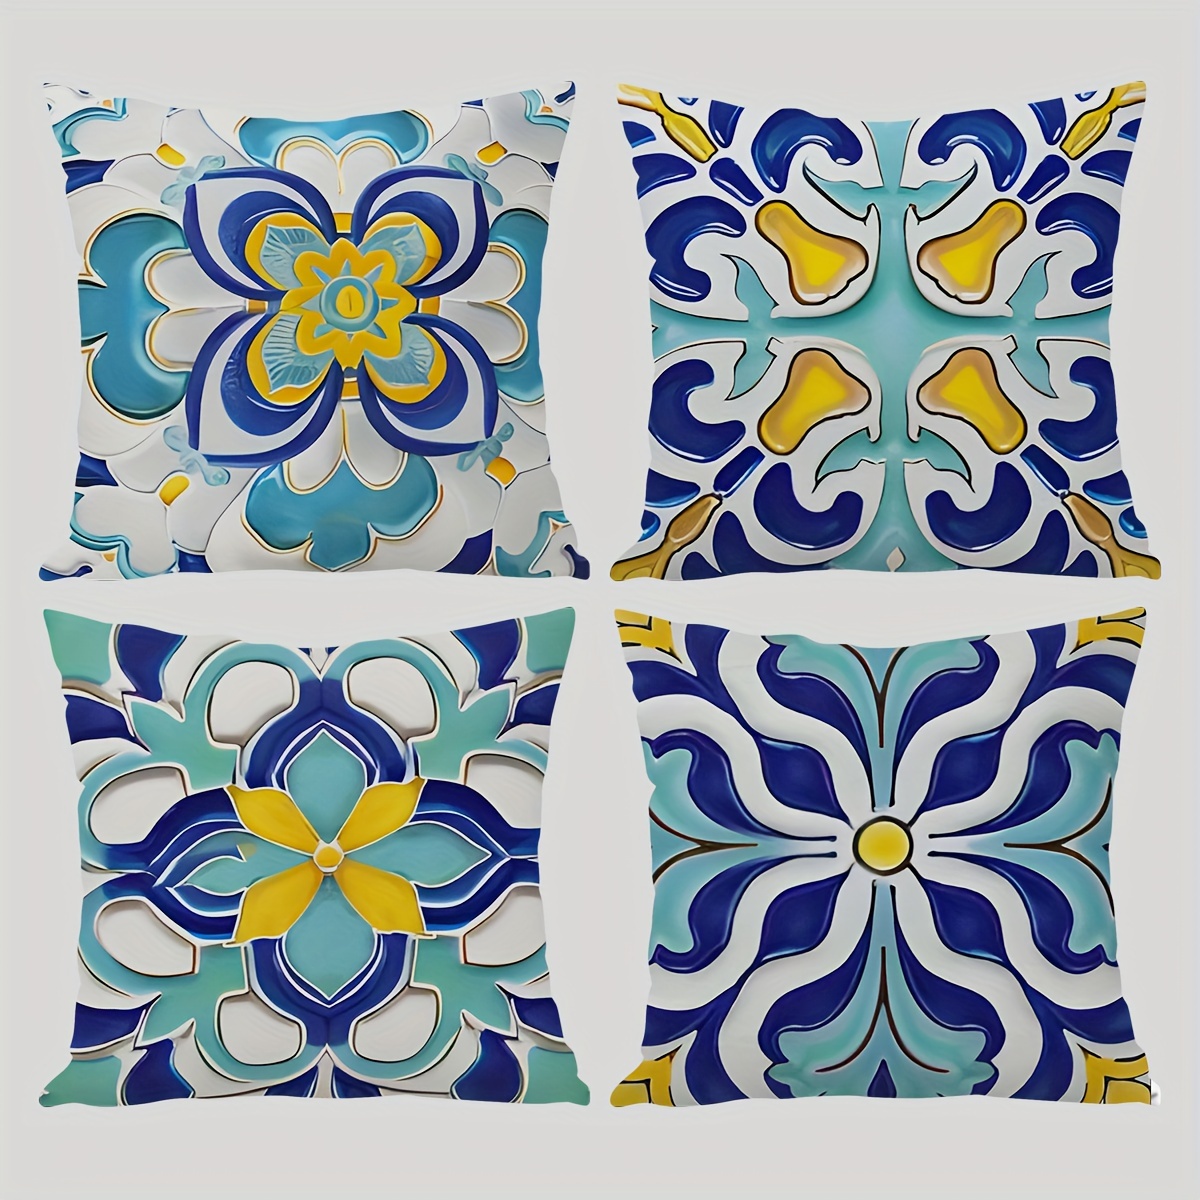 

Boho Chic 4-piece Waterproof Outdoor Throw Pillow Covers Set - Contemporary Geometric Design, Zip Closure, Hand Wash Only, Polyester - Perfect For Living Room & Patio Decor